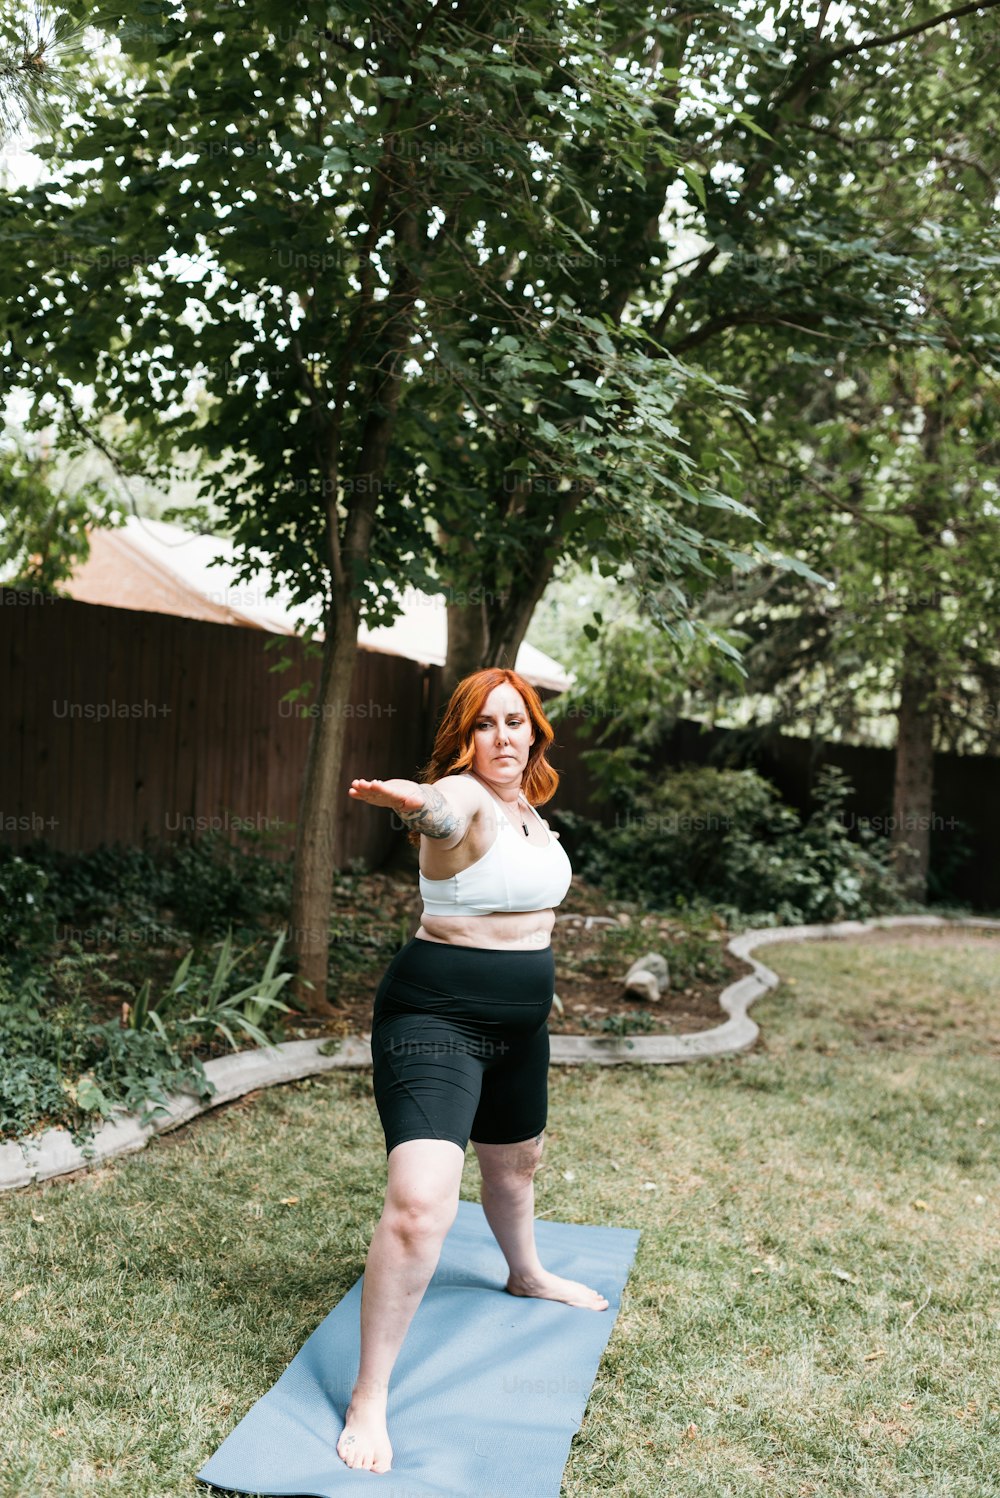 a woman standing on a yoga mat in a yard